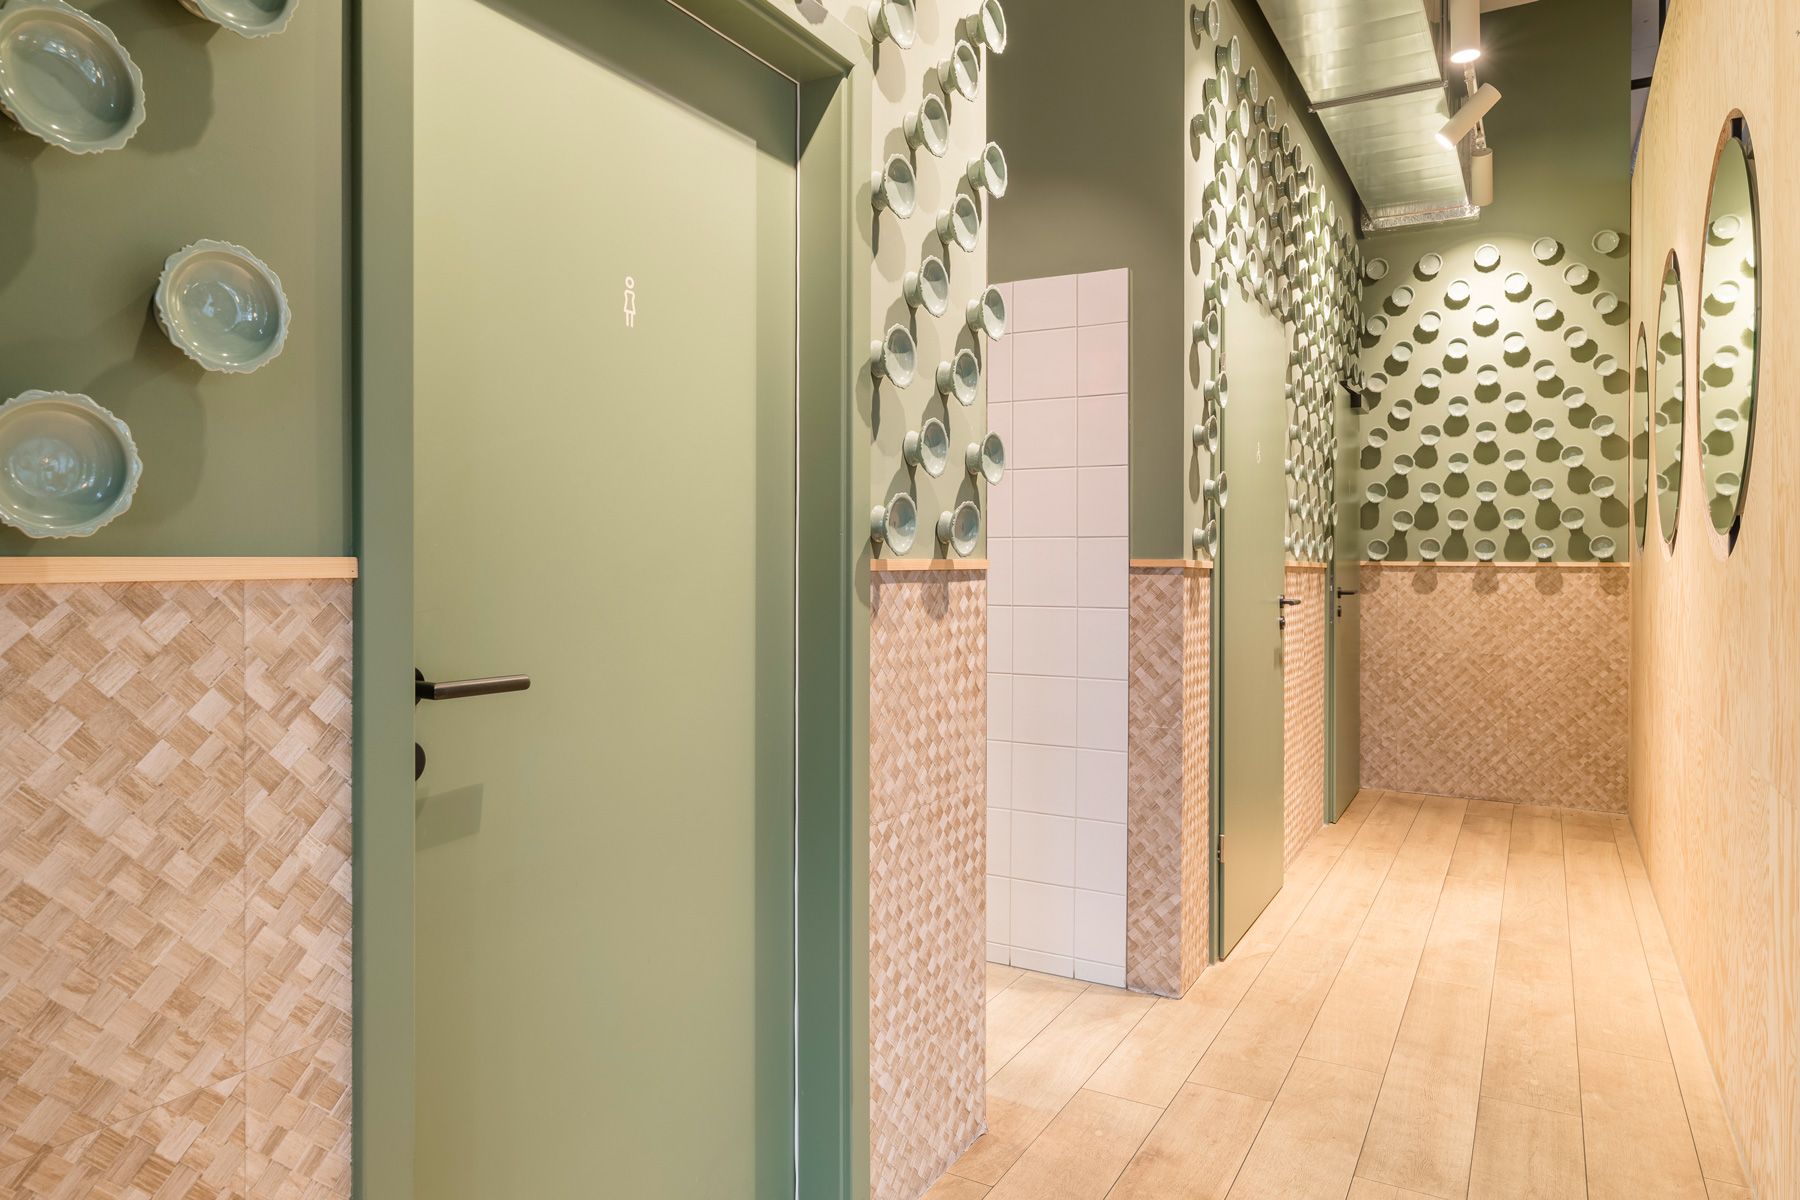 The hallway presents itself in an inviting green with green Chinese plattes hanging on the wall providing a decorative touchnbspThe guest toilets feature an eyecatching fish wallpaper on the walls and on the ceiling